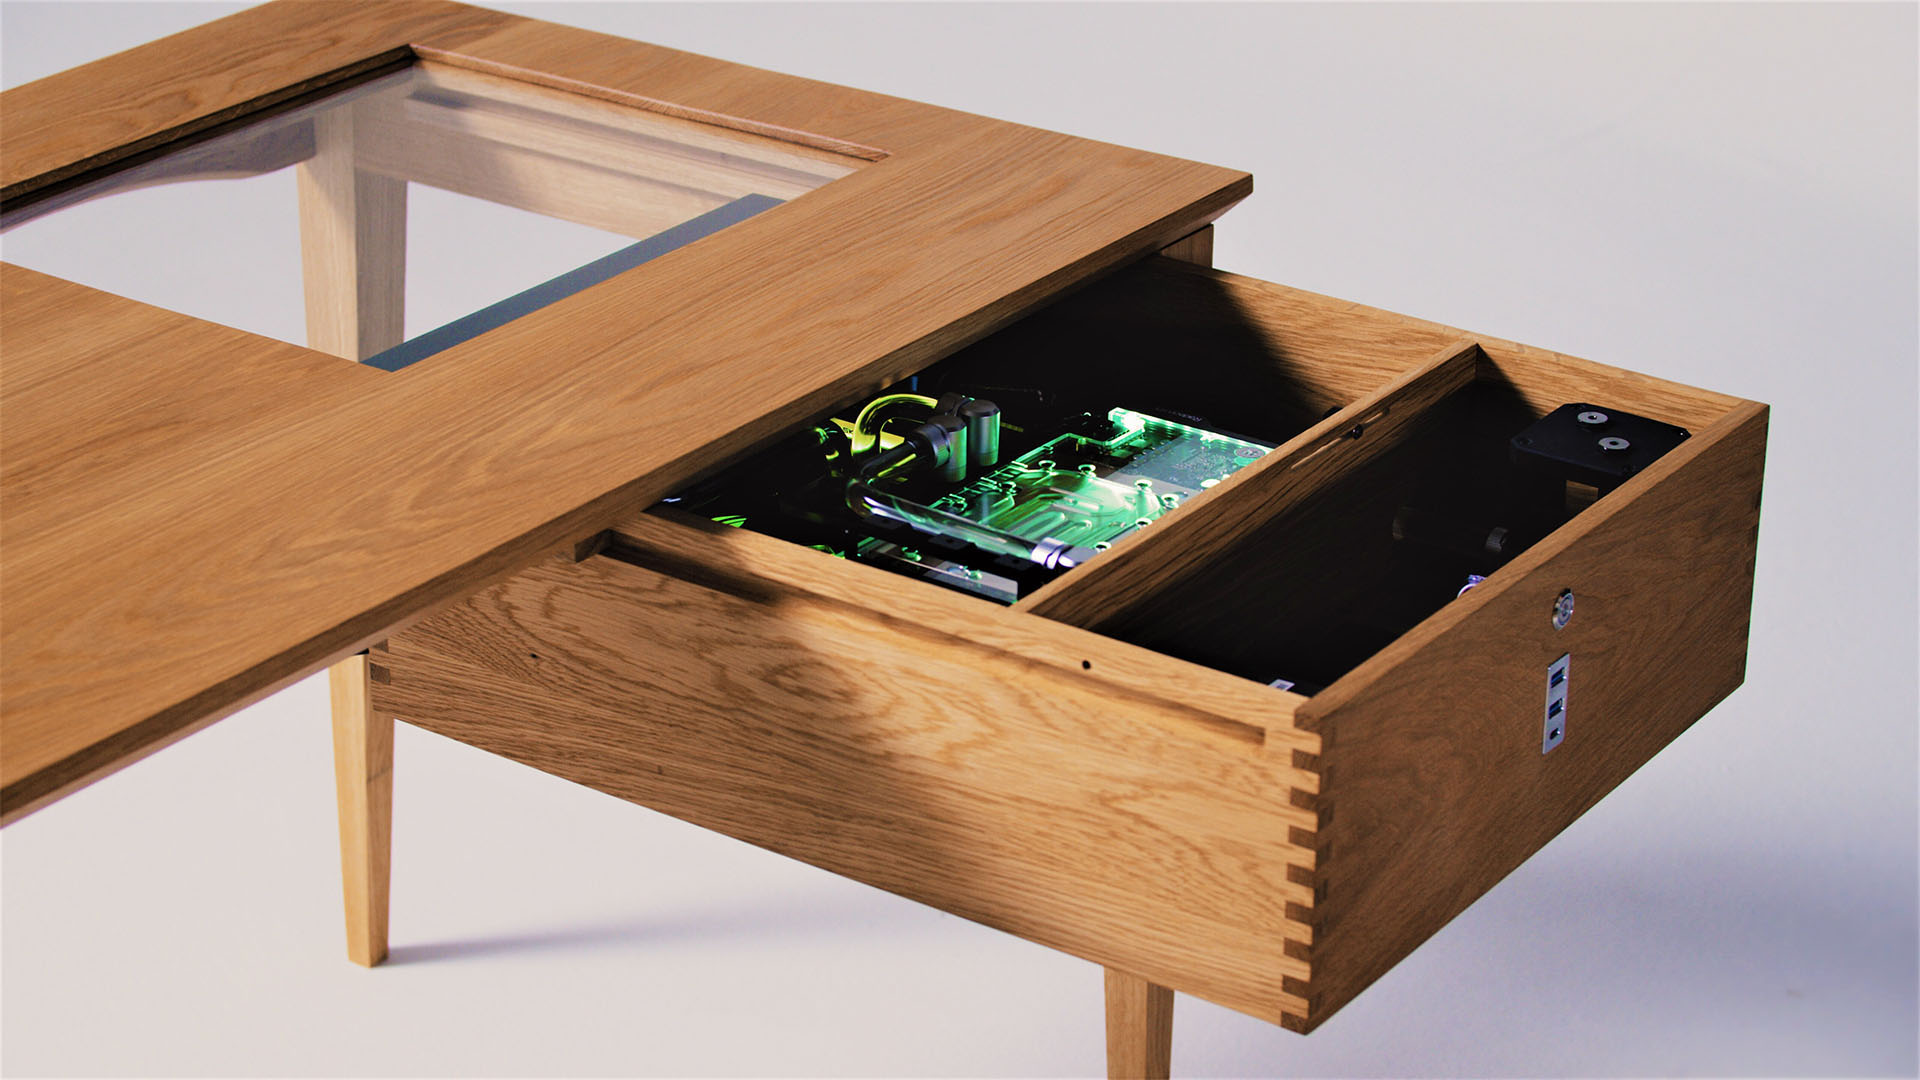 Wood water cooled desk PC: Open with green lighting